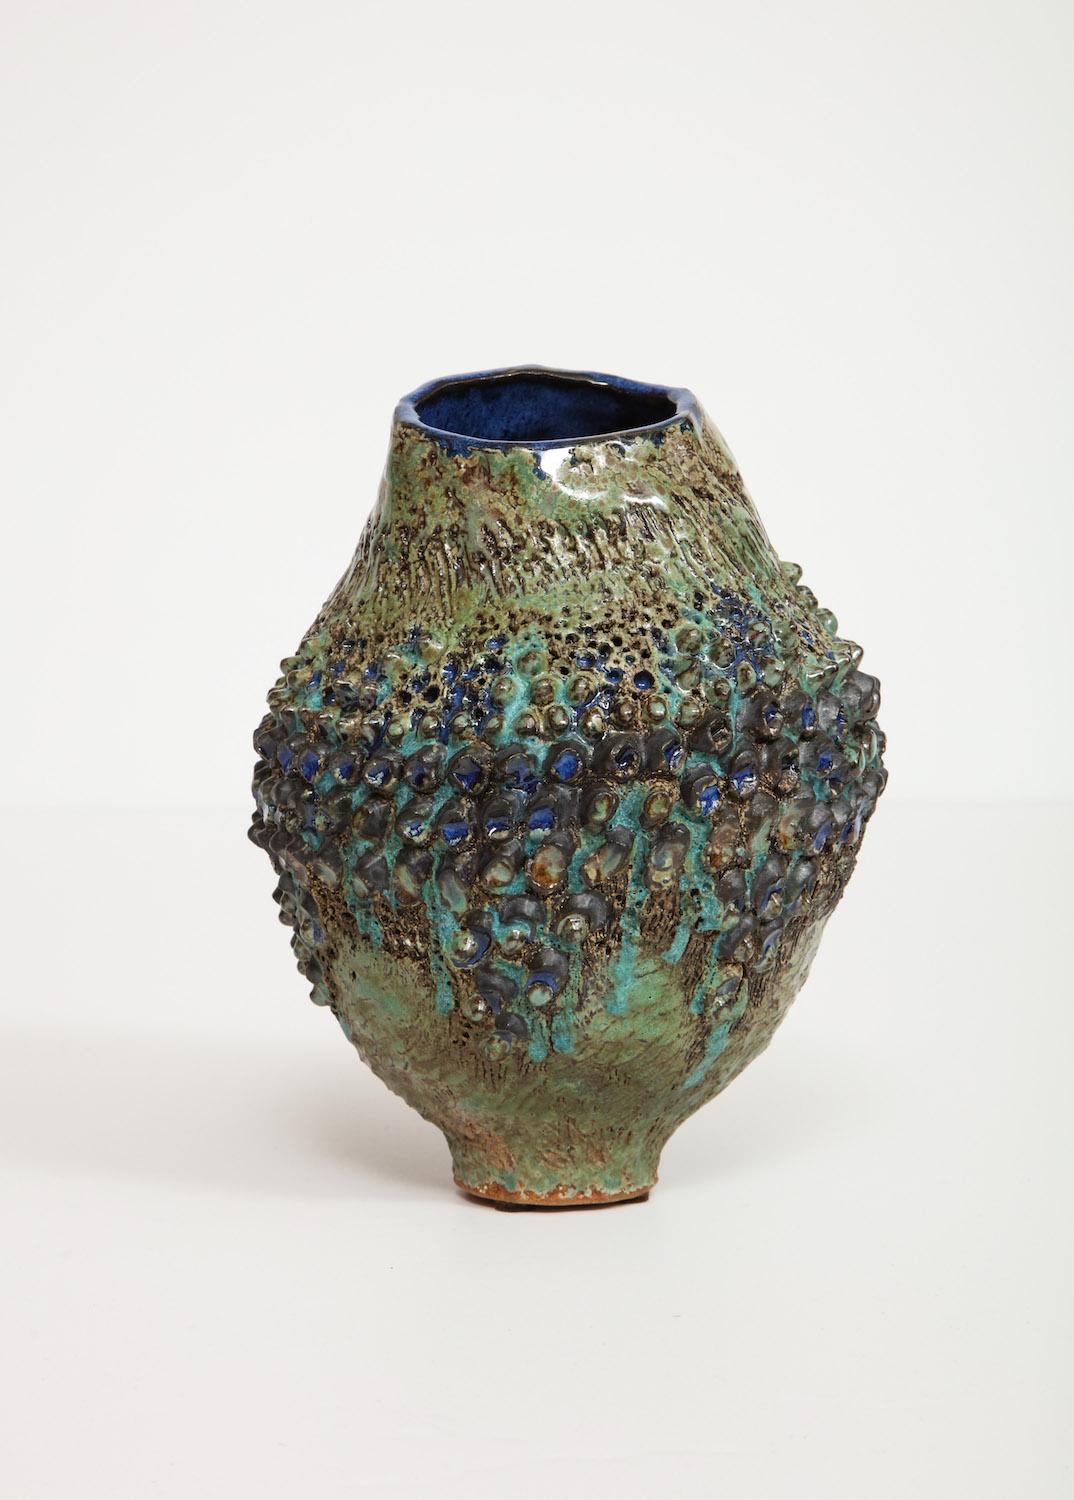 Hand-built irregular form, stoneware vase. Applied texture throughout with vibrant glazes. Artist-signed and dated on underside.